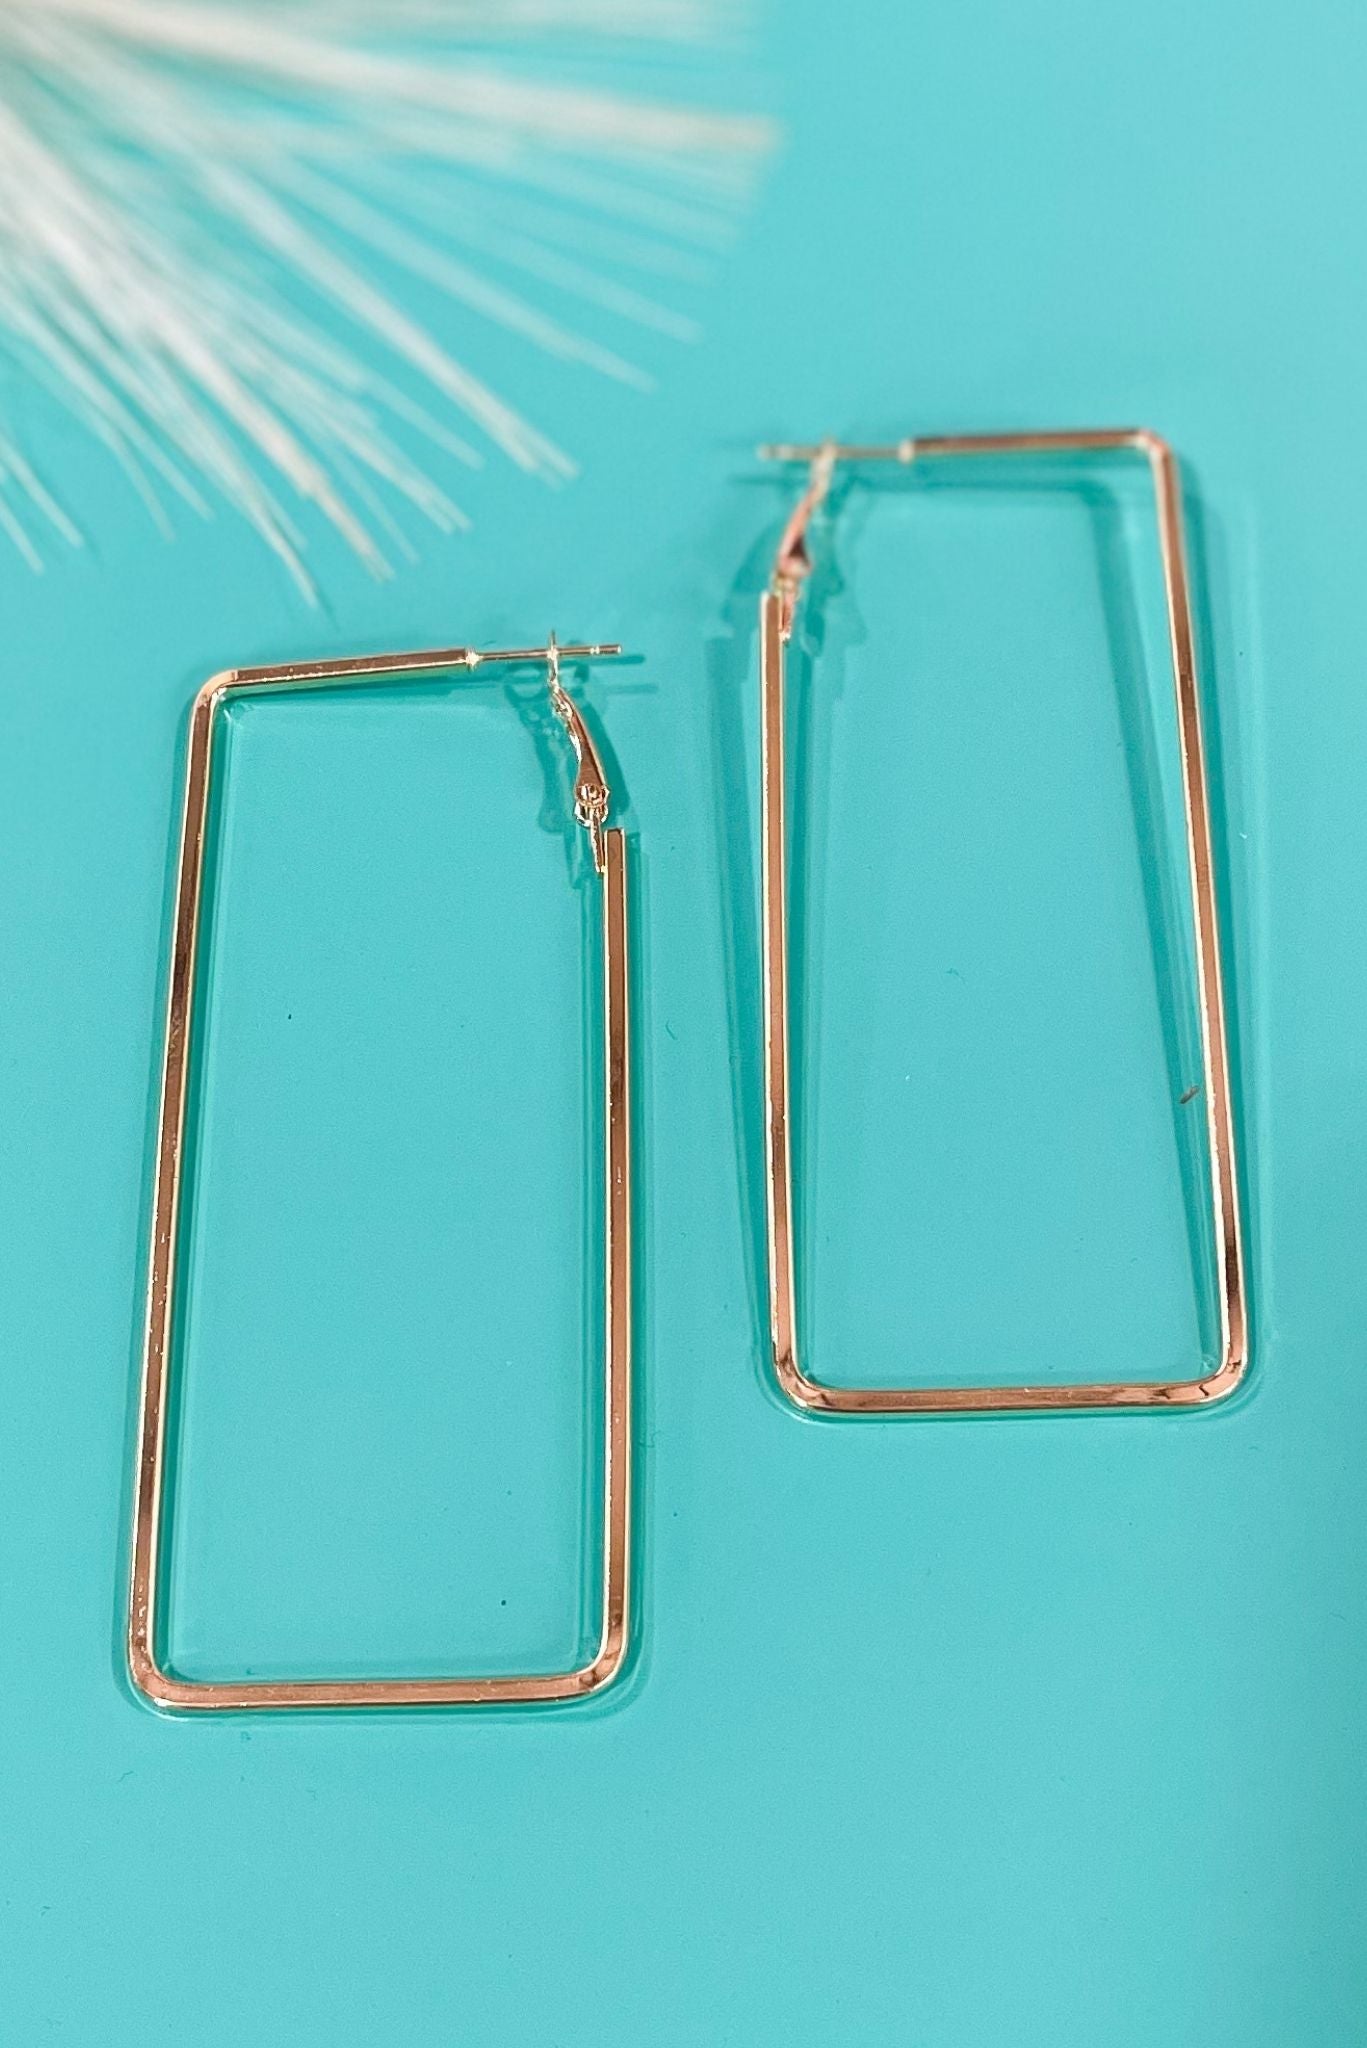 Gold Open Rectangle Hoop Earrings, staple piece, everyday wear, rectangle hoop, 3 sizes, shop style your senses by mallory fitzsimmons